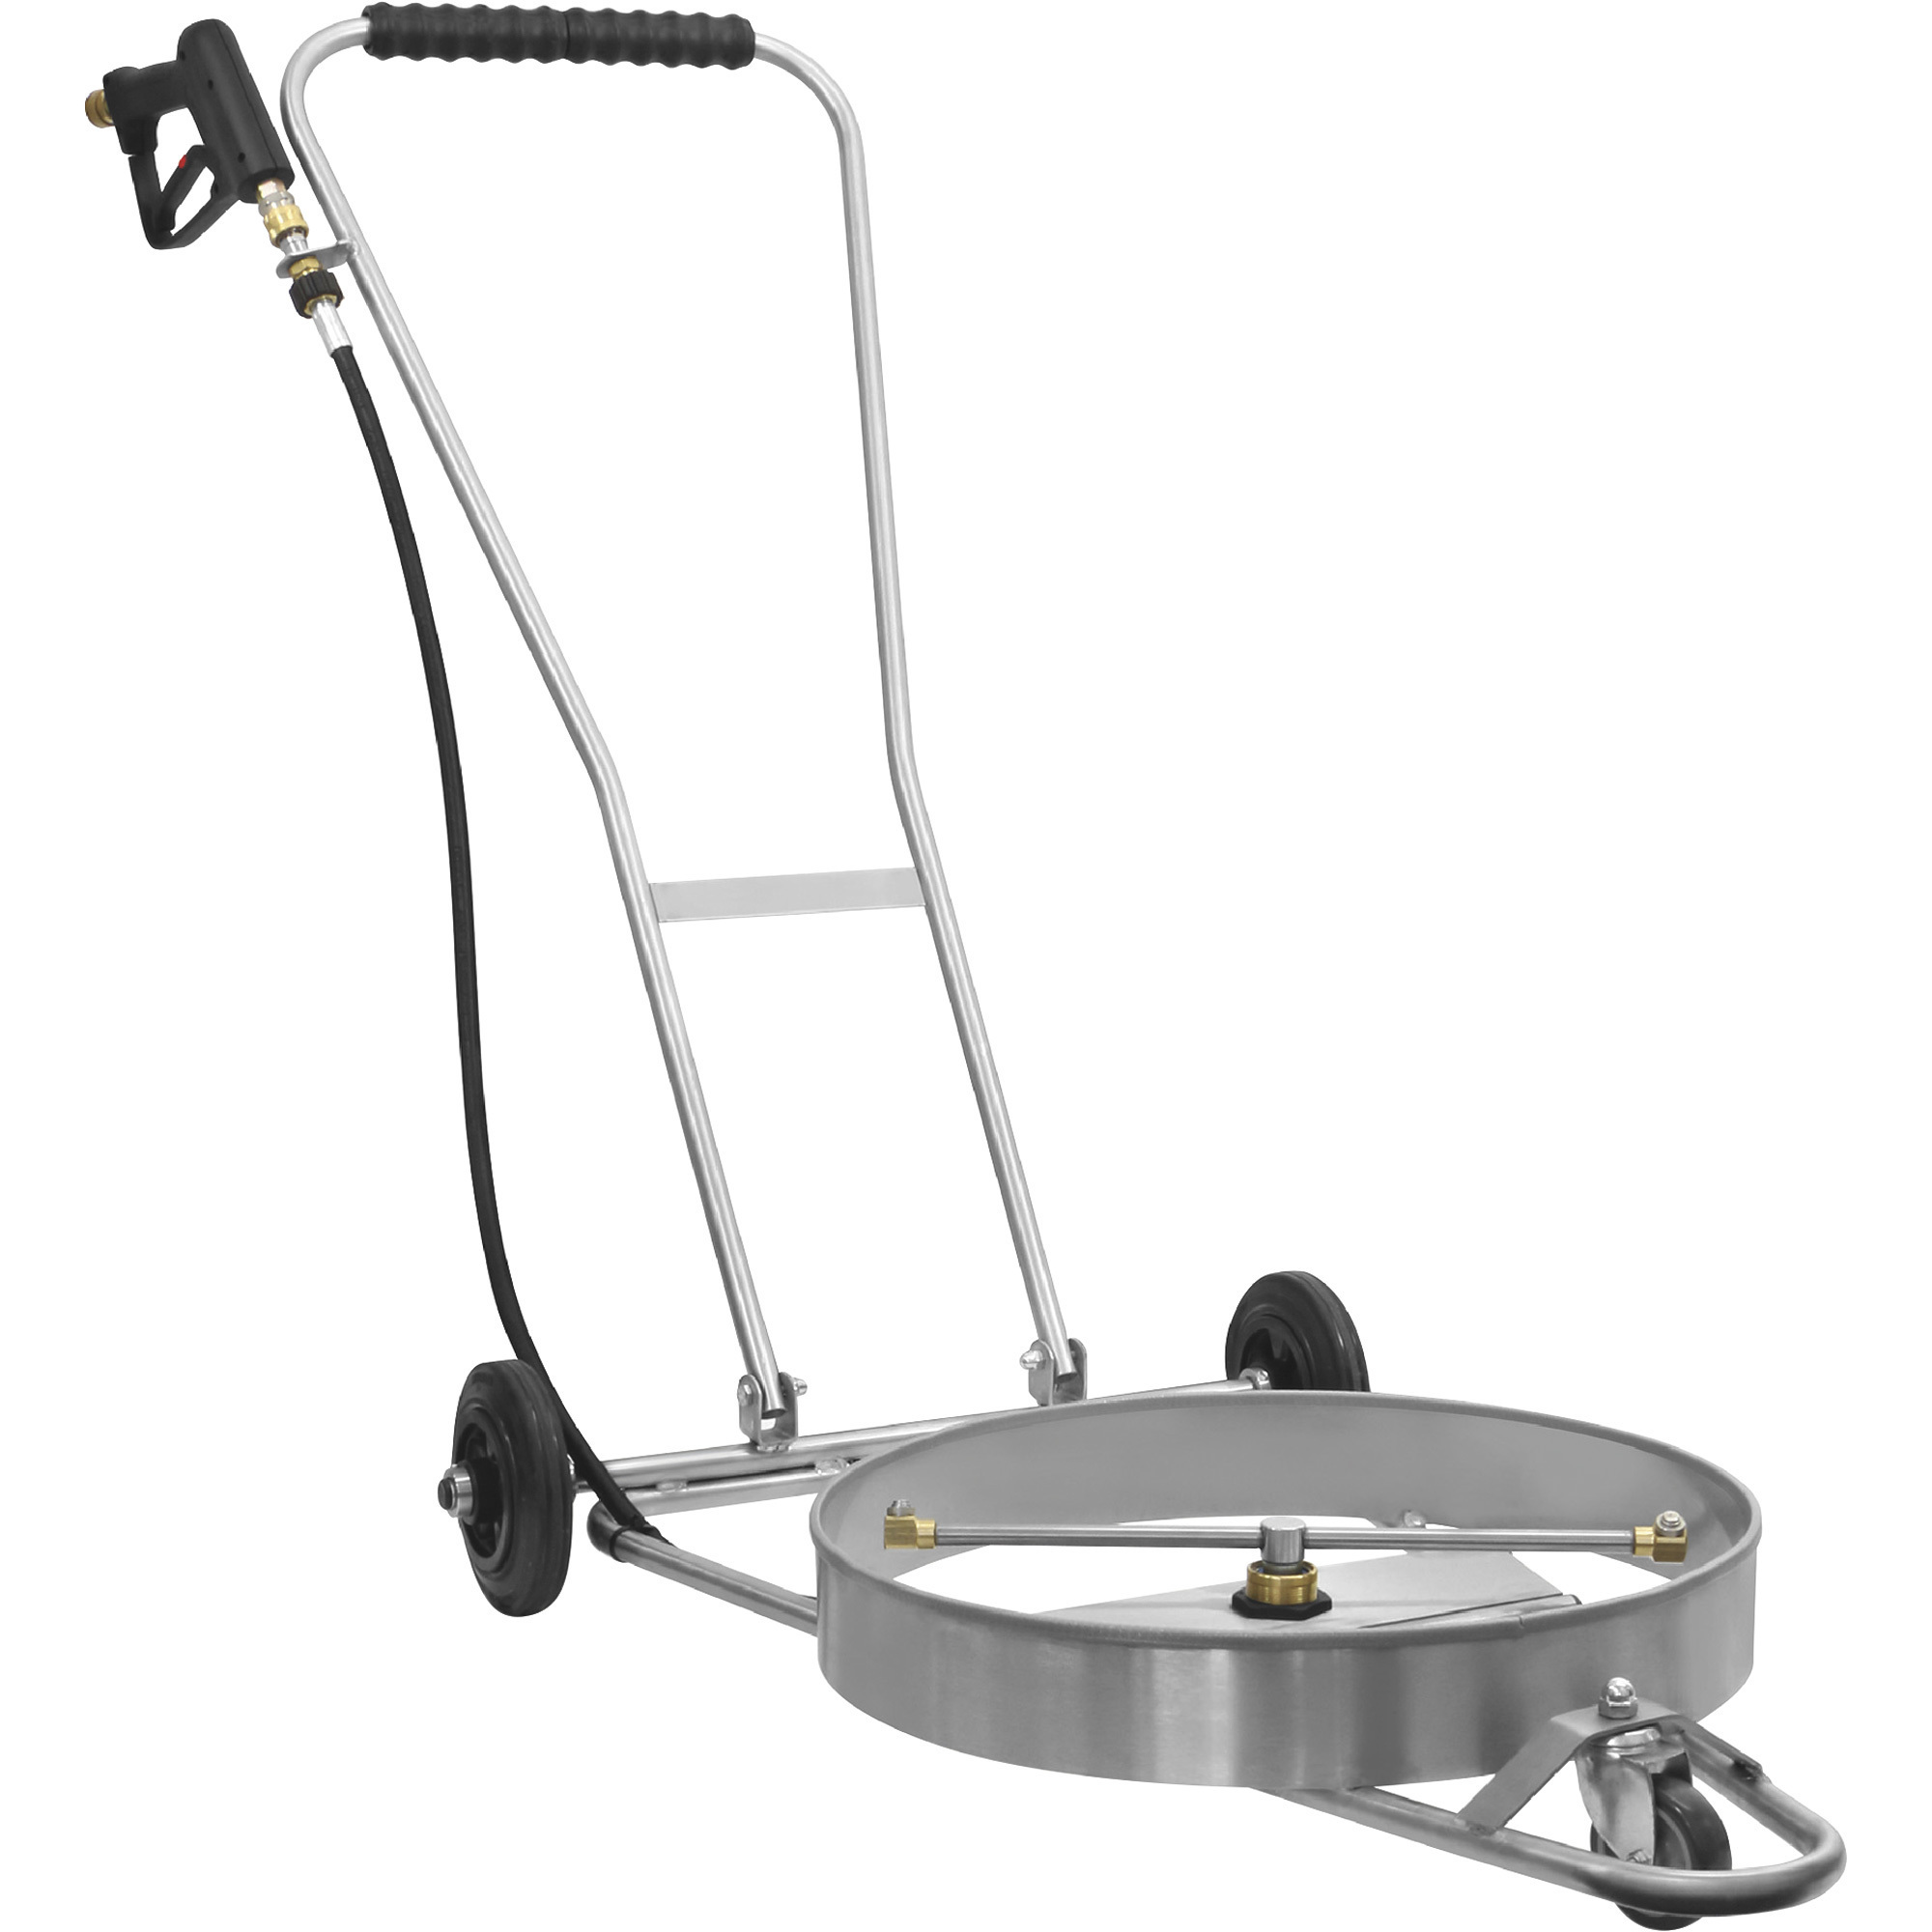 WSI Undercarriage Pressure Washer Surface Cleaner, 20Inch Diameter, 5000 PSI, 8.0 GPM